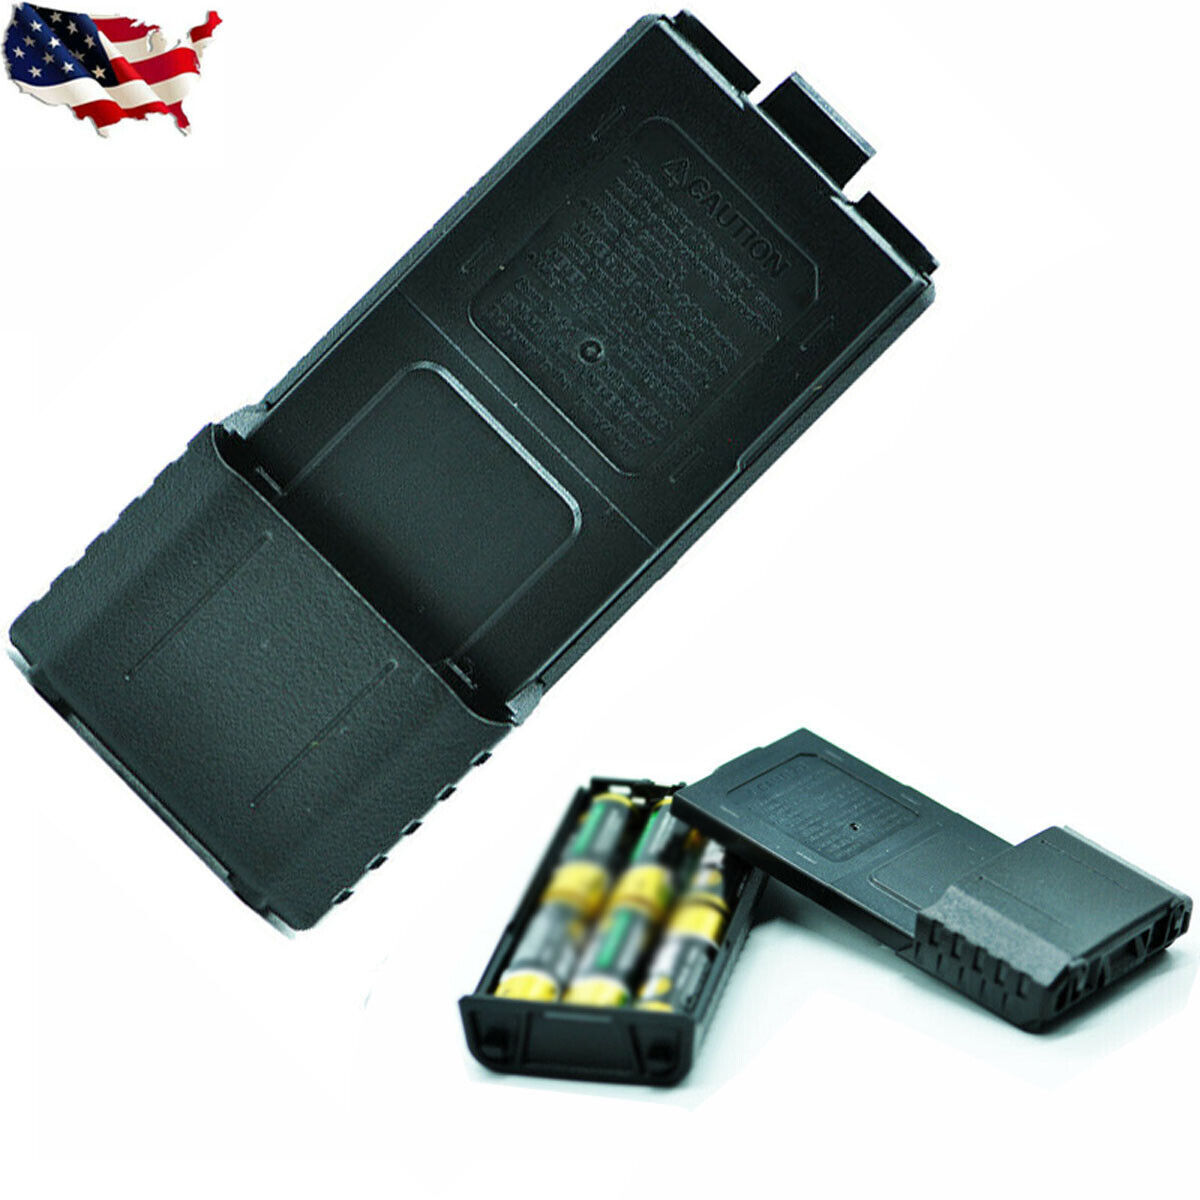 Uv-5R Or Plus 6Xaa Extended 2 Way Radio Battery Case Shell For Baofeng - $16.14